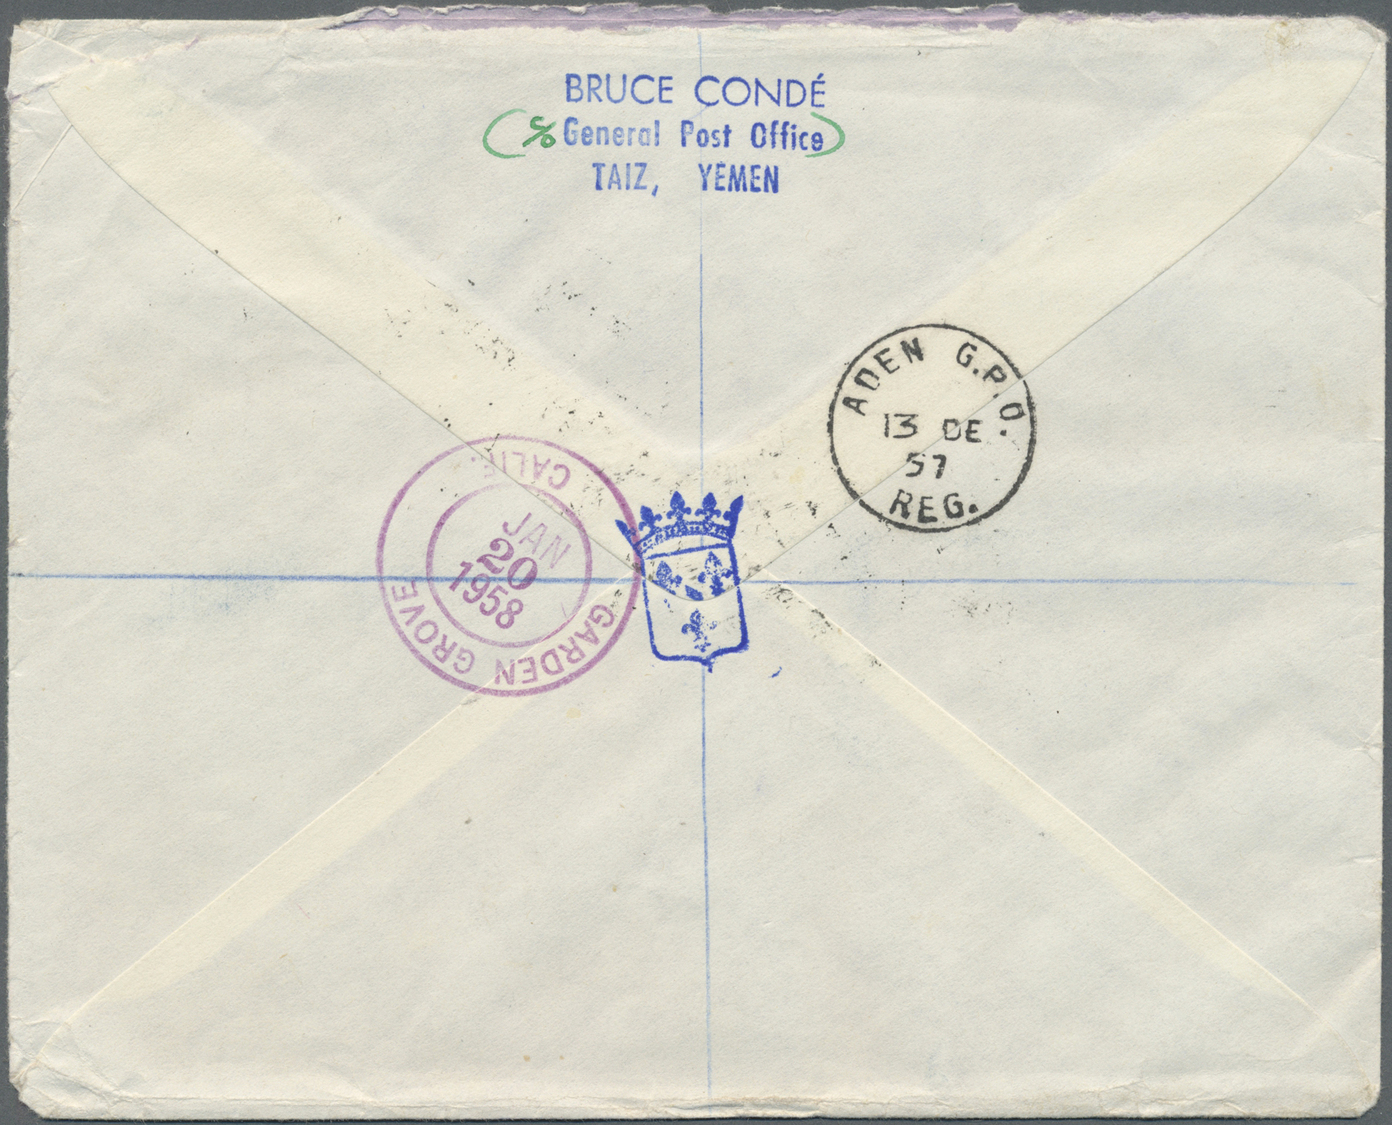 Br Jemen: 1957/1960, lot of four covers to USA resp. Aden, three registered mail, 4b. Arab Postal Union plate number, so